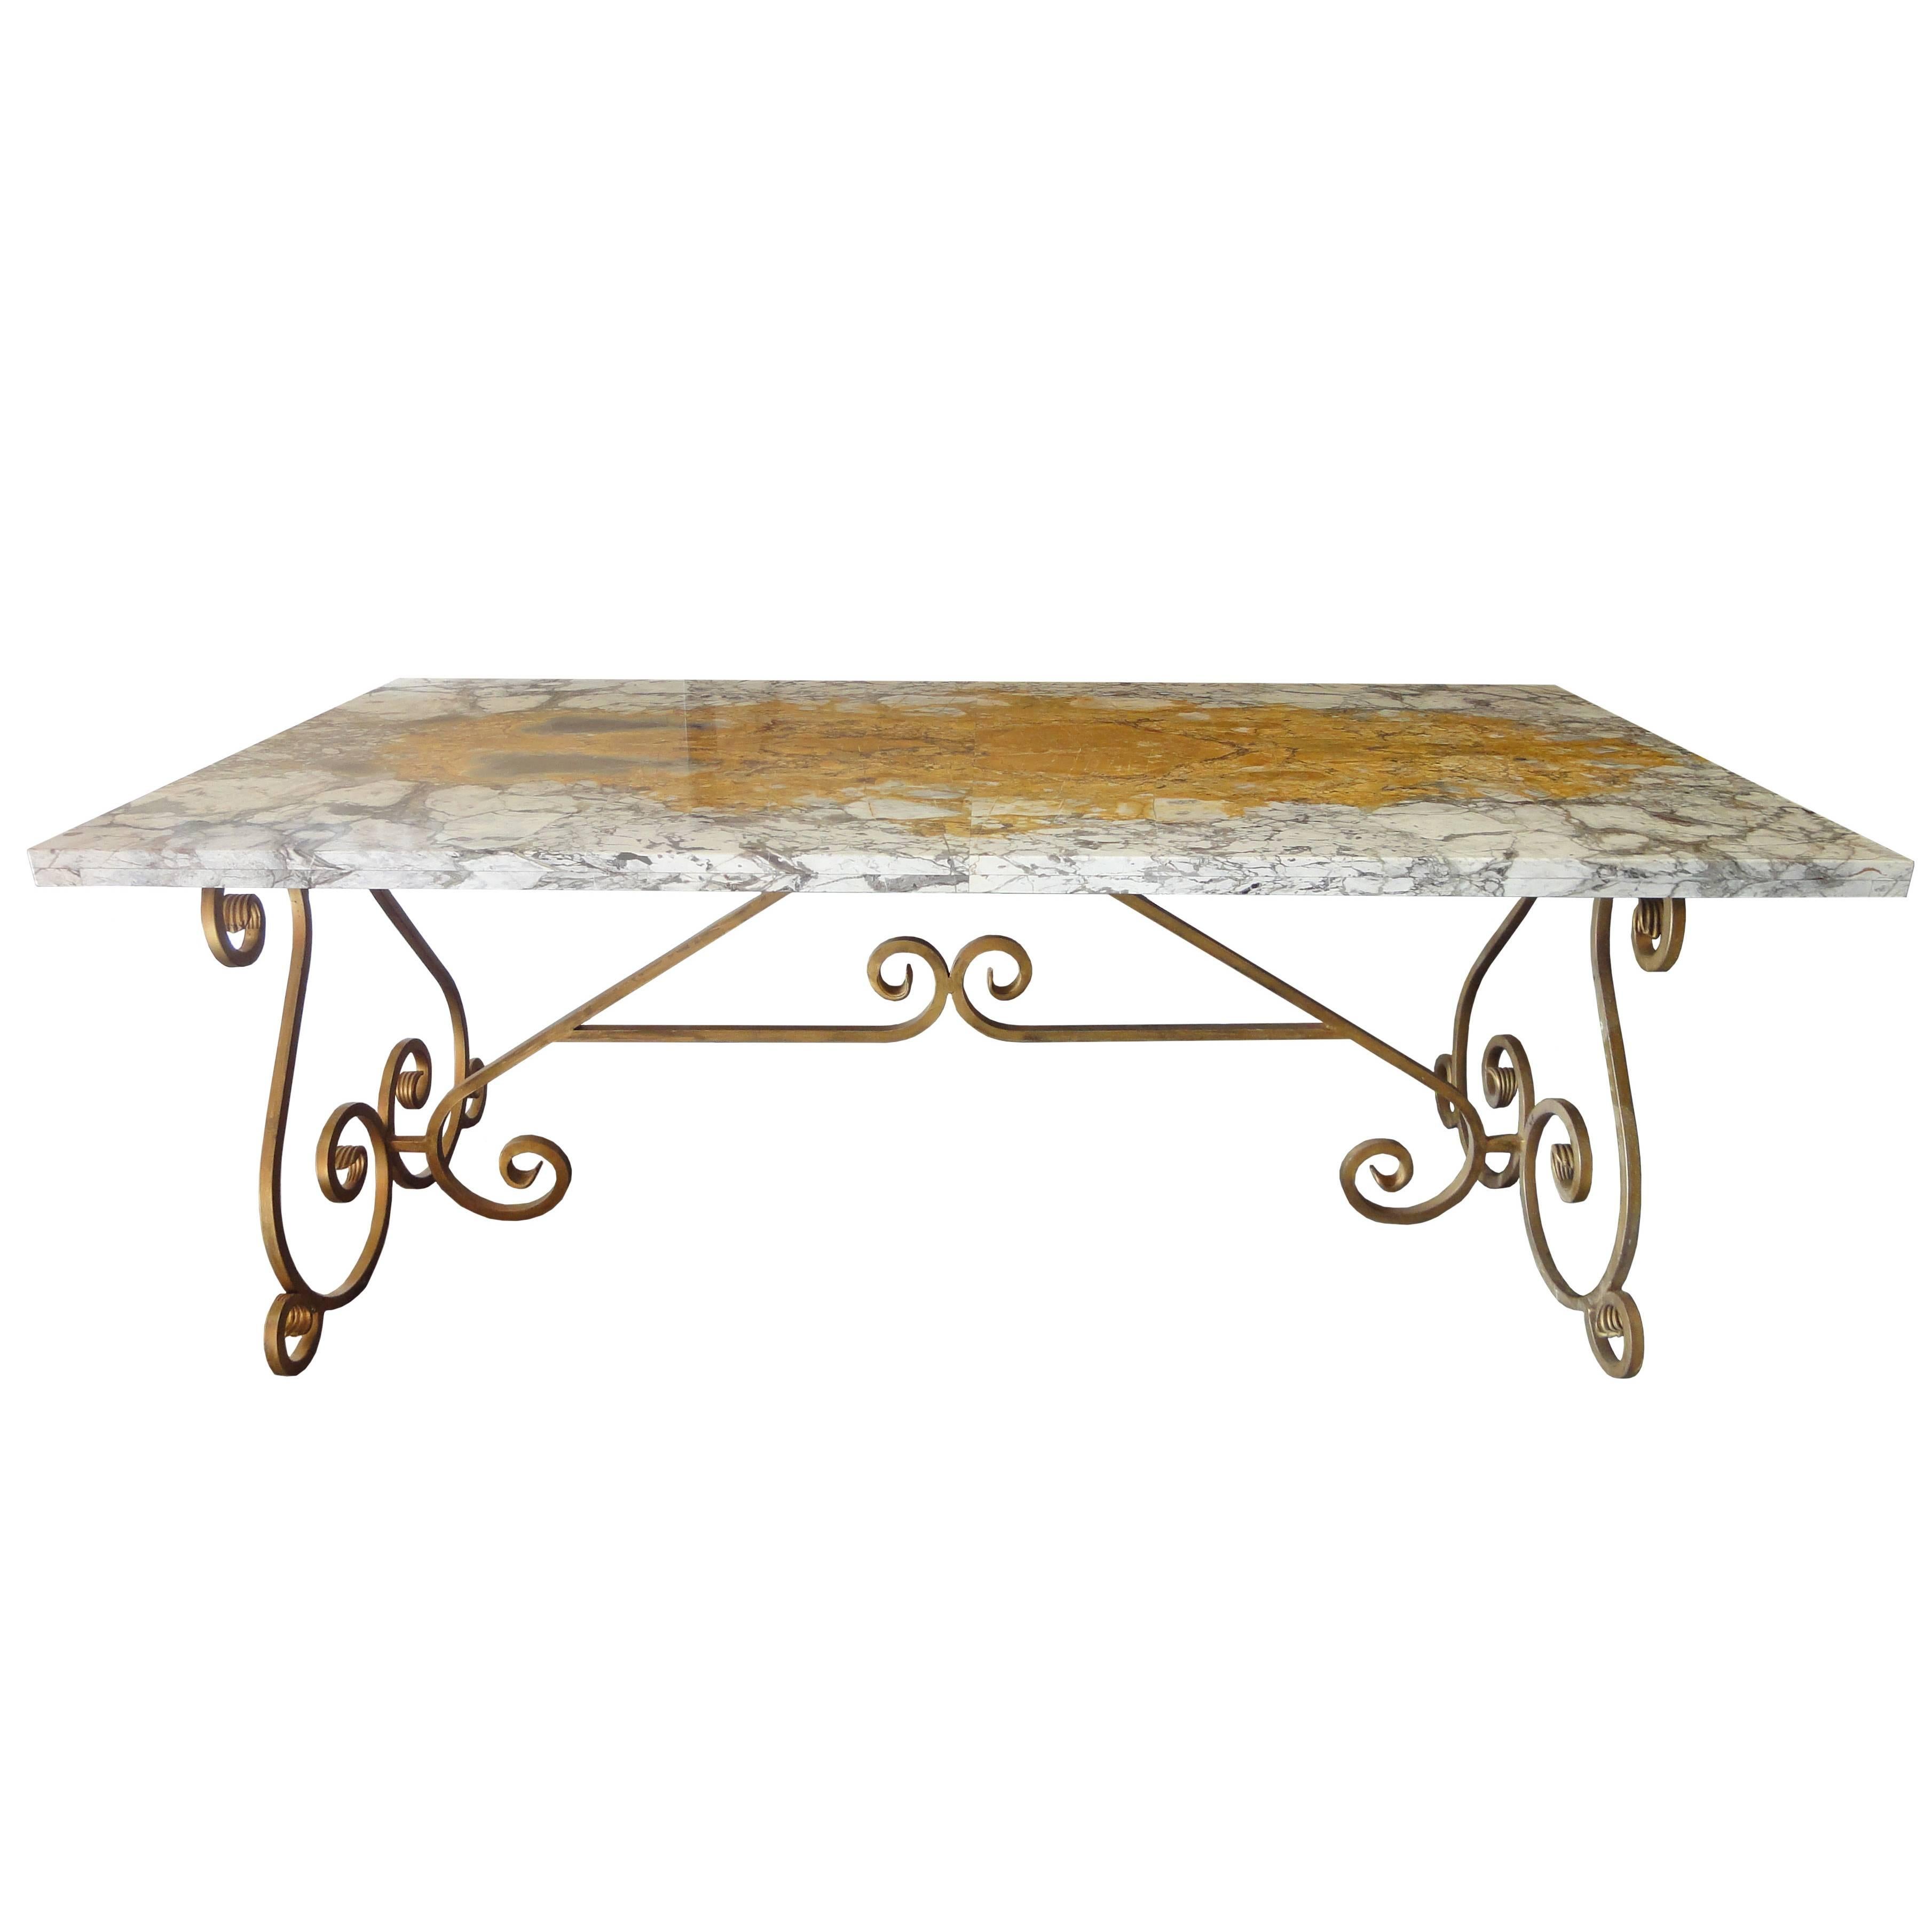 Italian-Style Table with Unique Yellow Siena Marble Top, Gilded Base For Sale